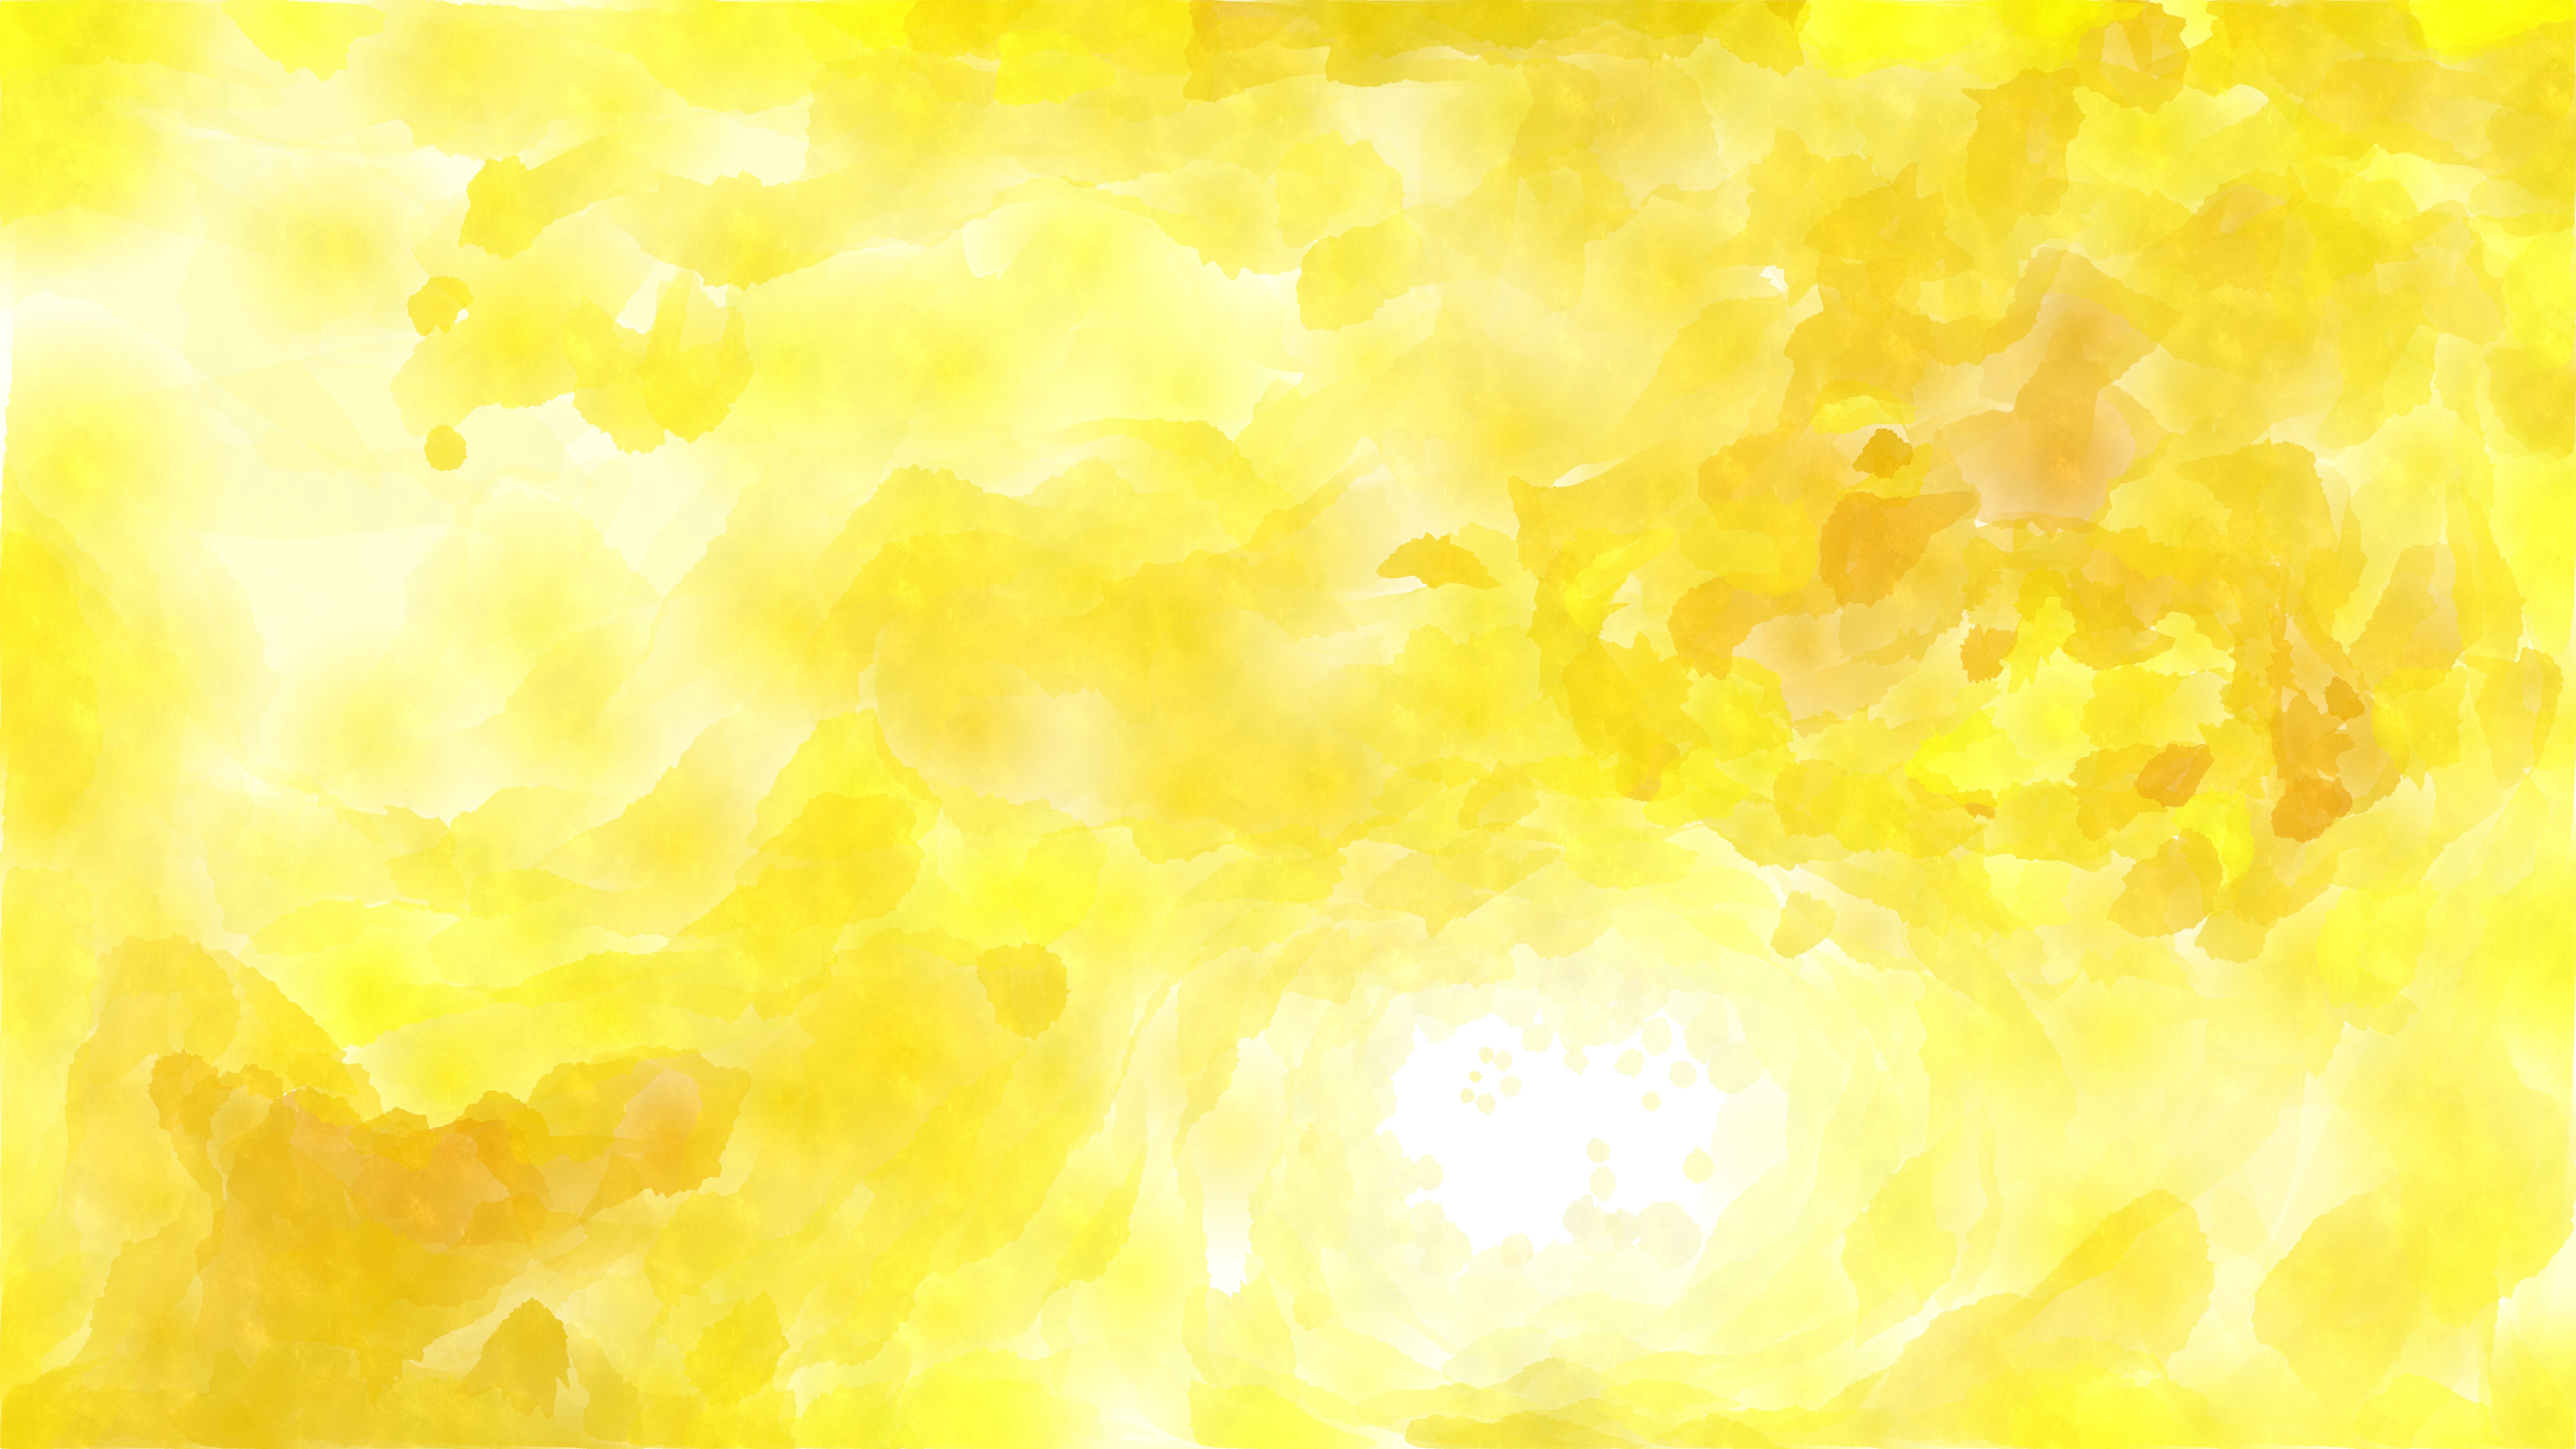 Free Yellow Watercolor Texture Image